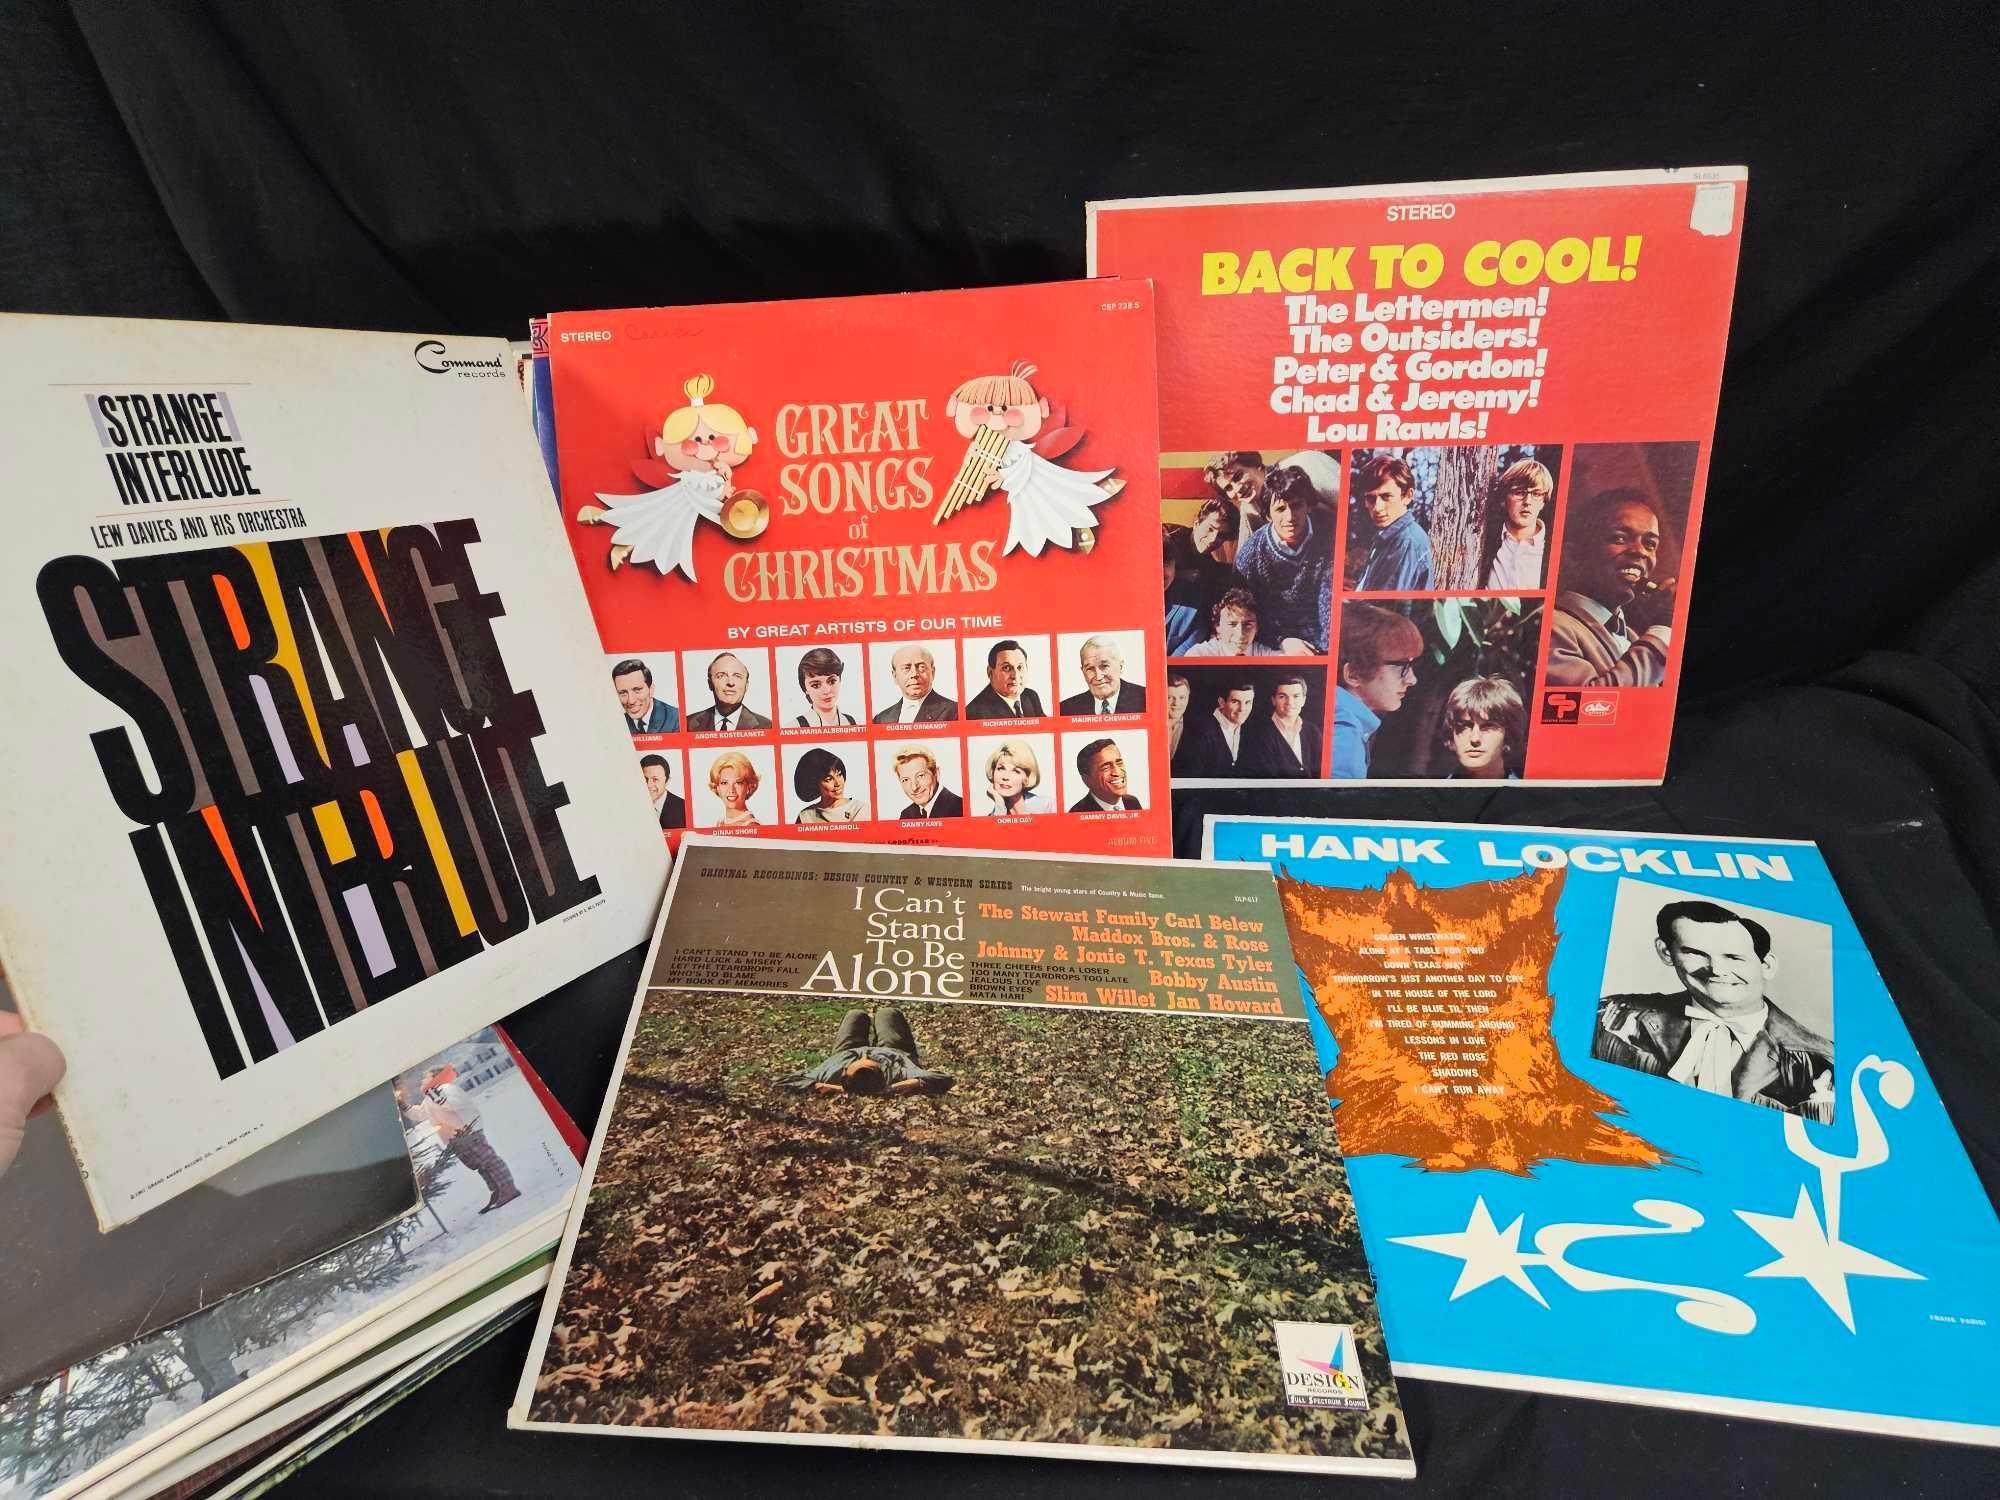 Vintage LP vinyls, including Hank Williams, the girl from ipanema, rods and rails drag strip sounds.